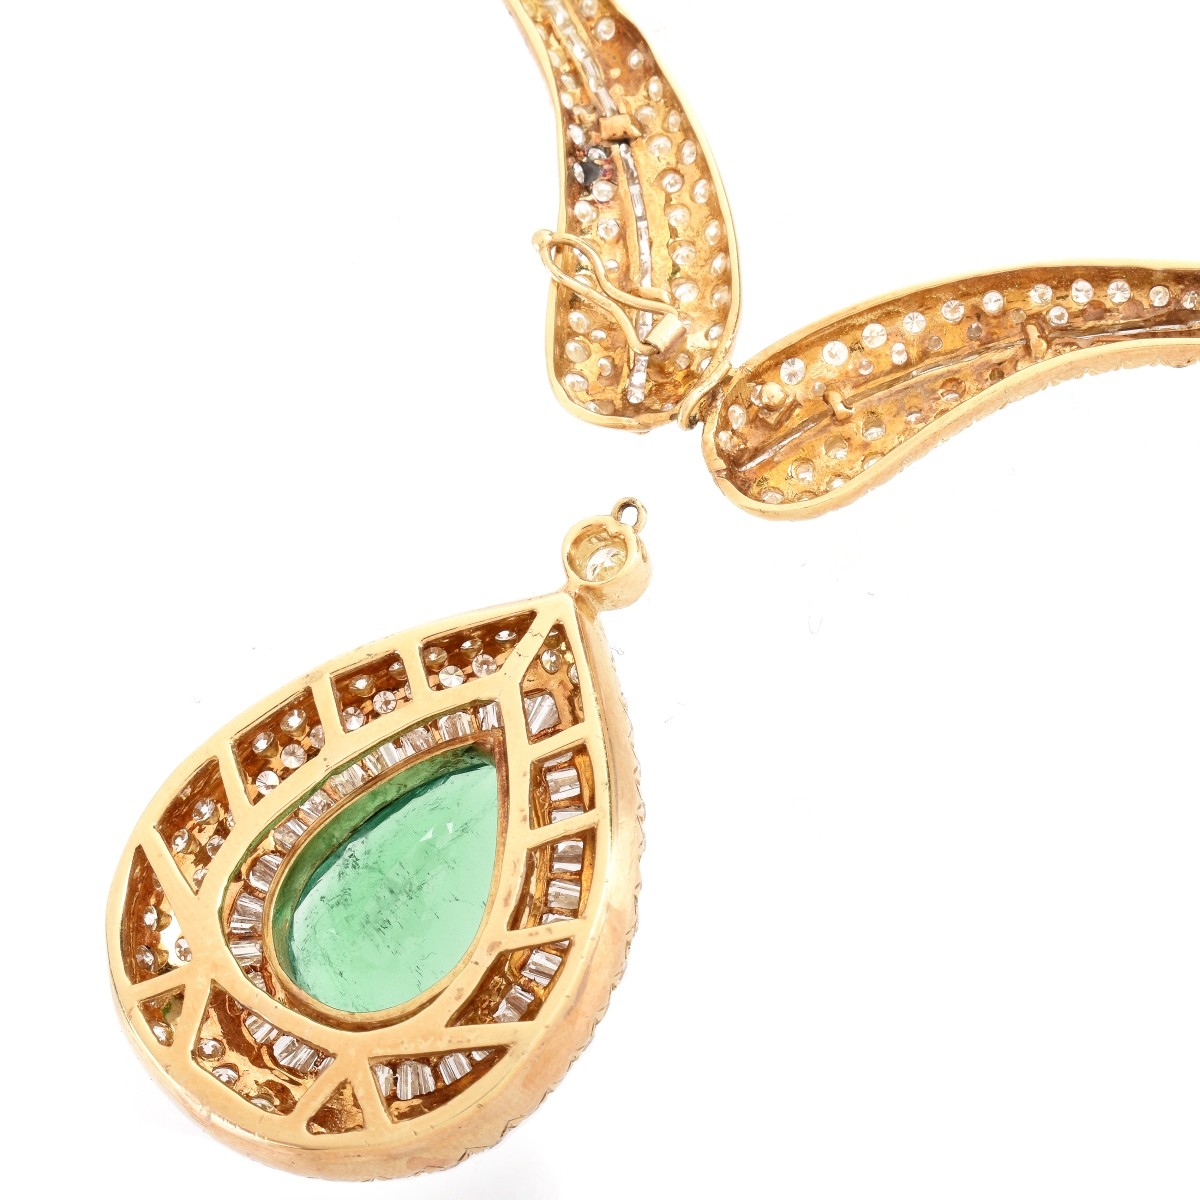 Important Emerald, Diamond and 18K Necklace